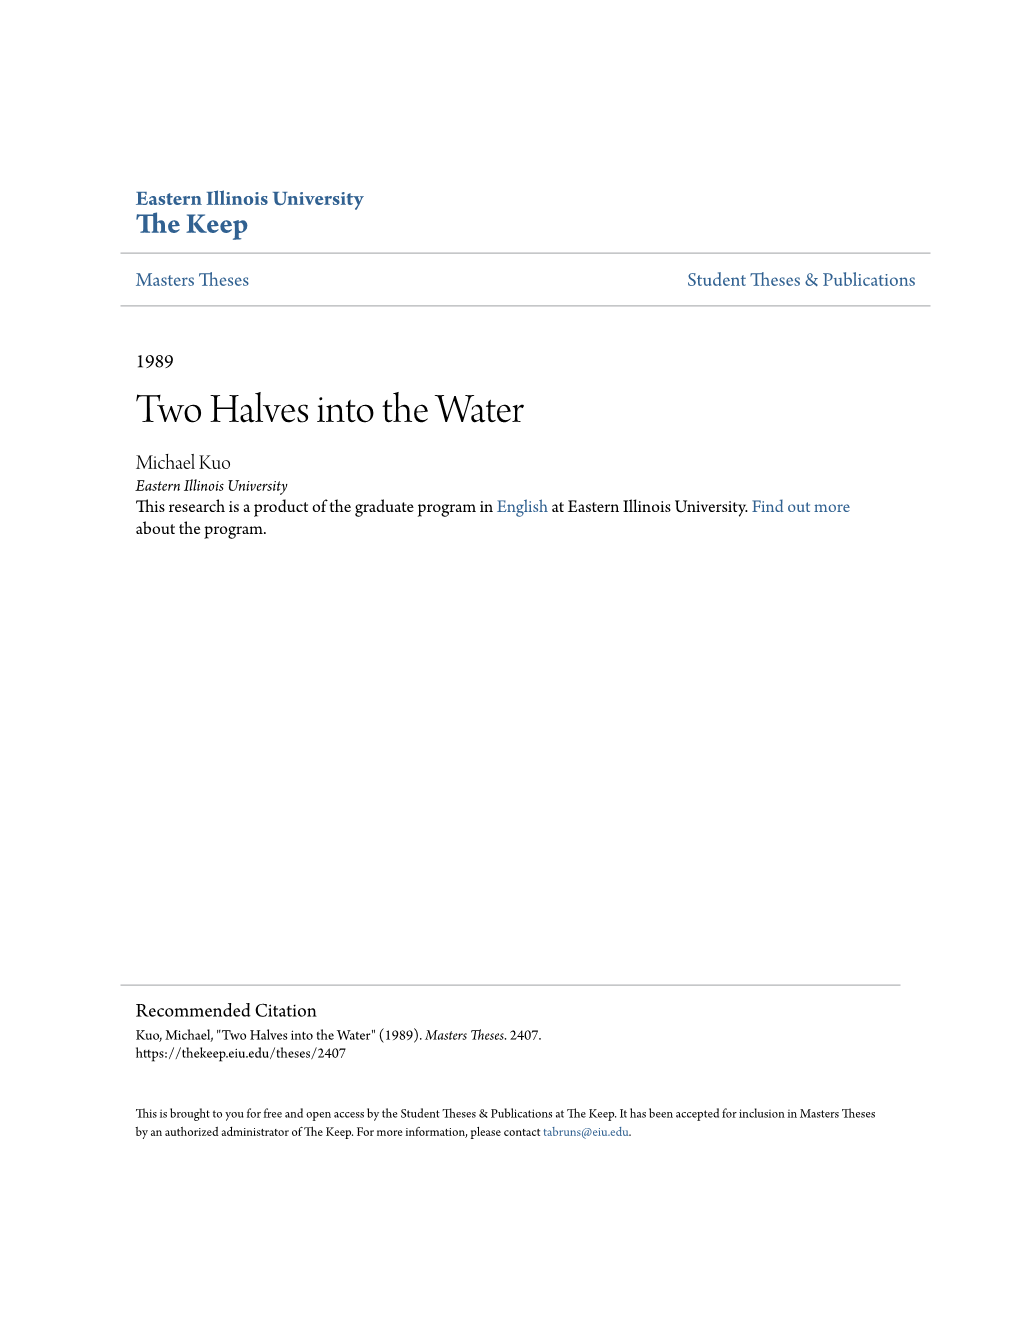 Two Halves Into the Water Michael Kuo Eastern Illinois University This Research Is a Product of the Graduate Program in English at Eastern Illinois University